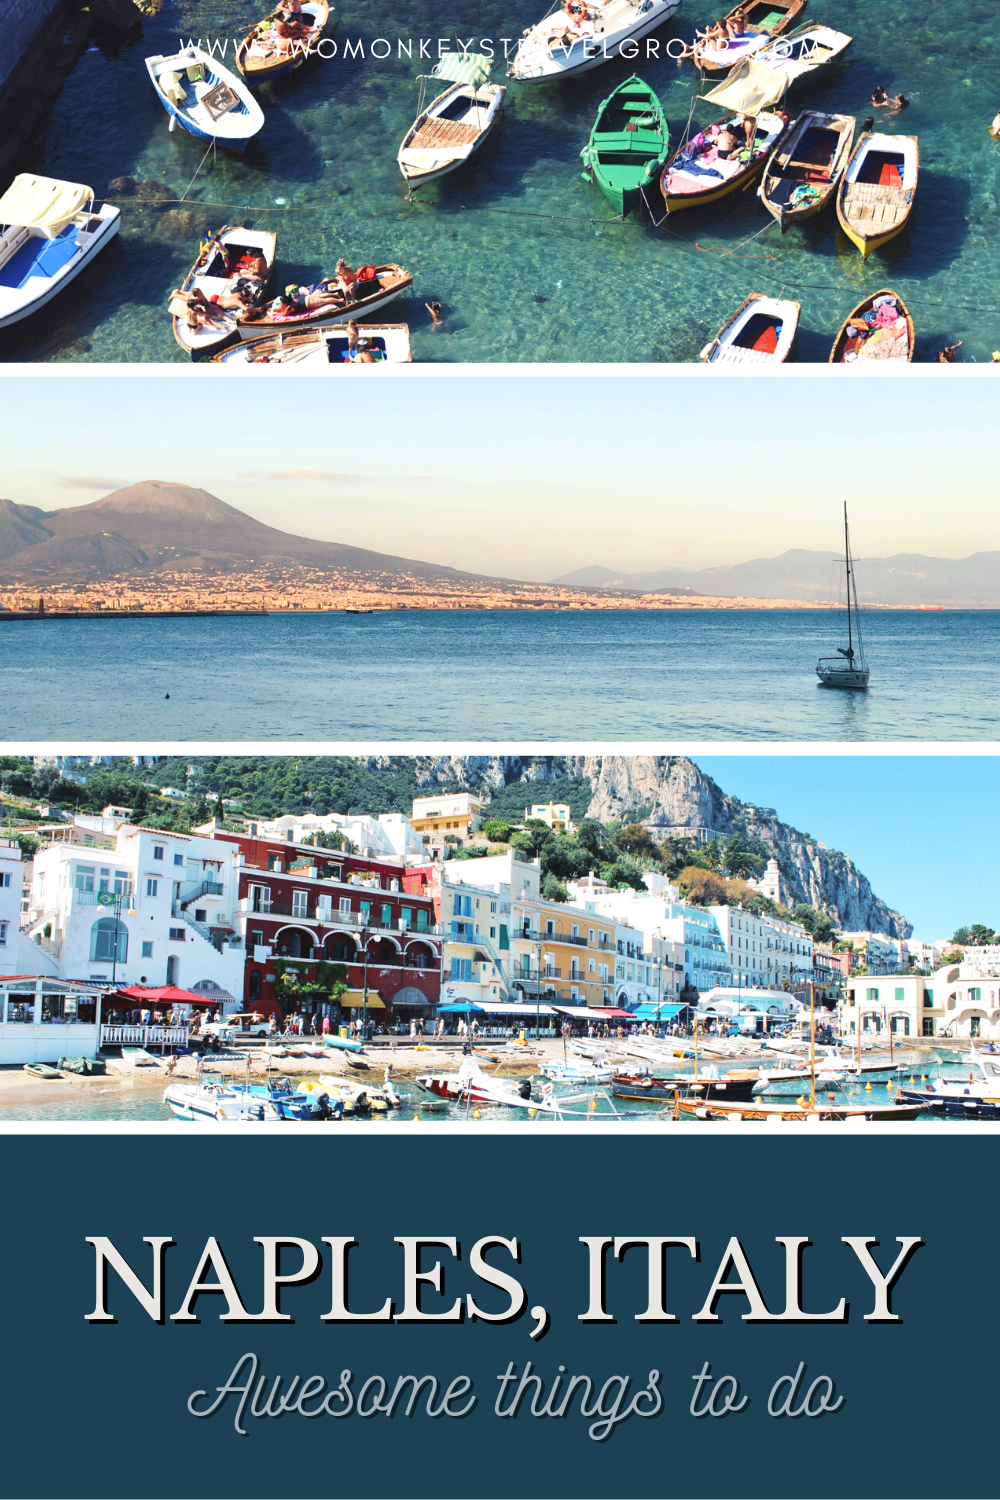 7 Awesome Things to do in Naples, Italy